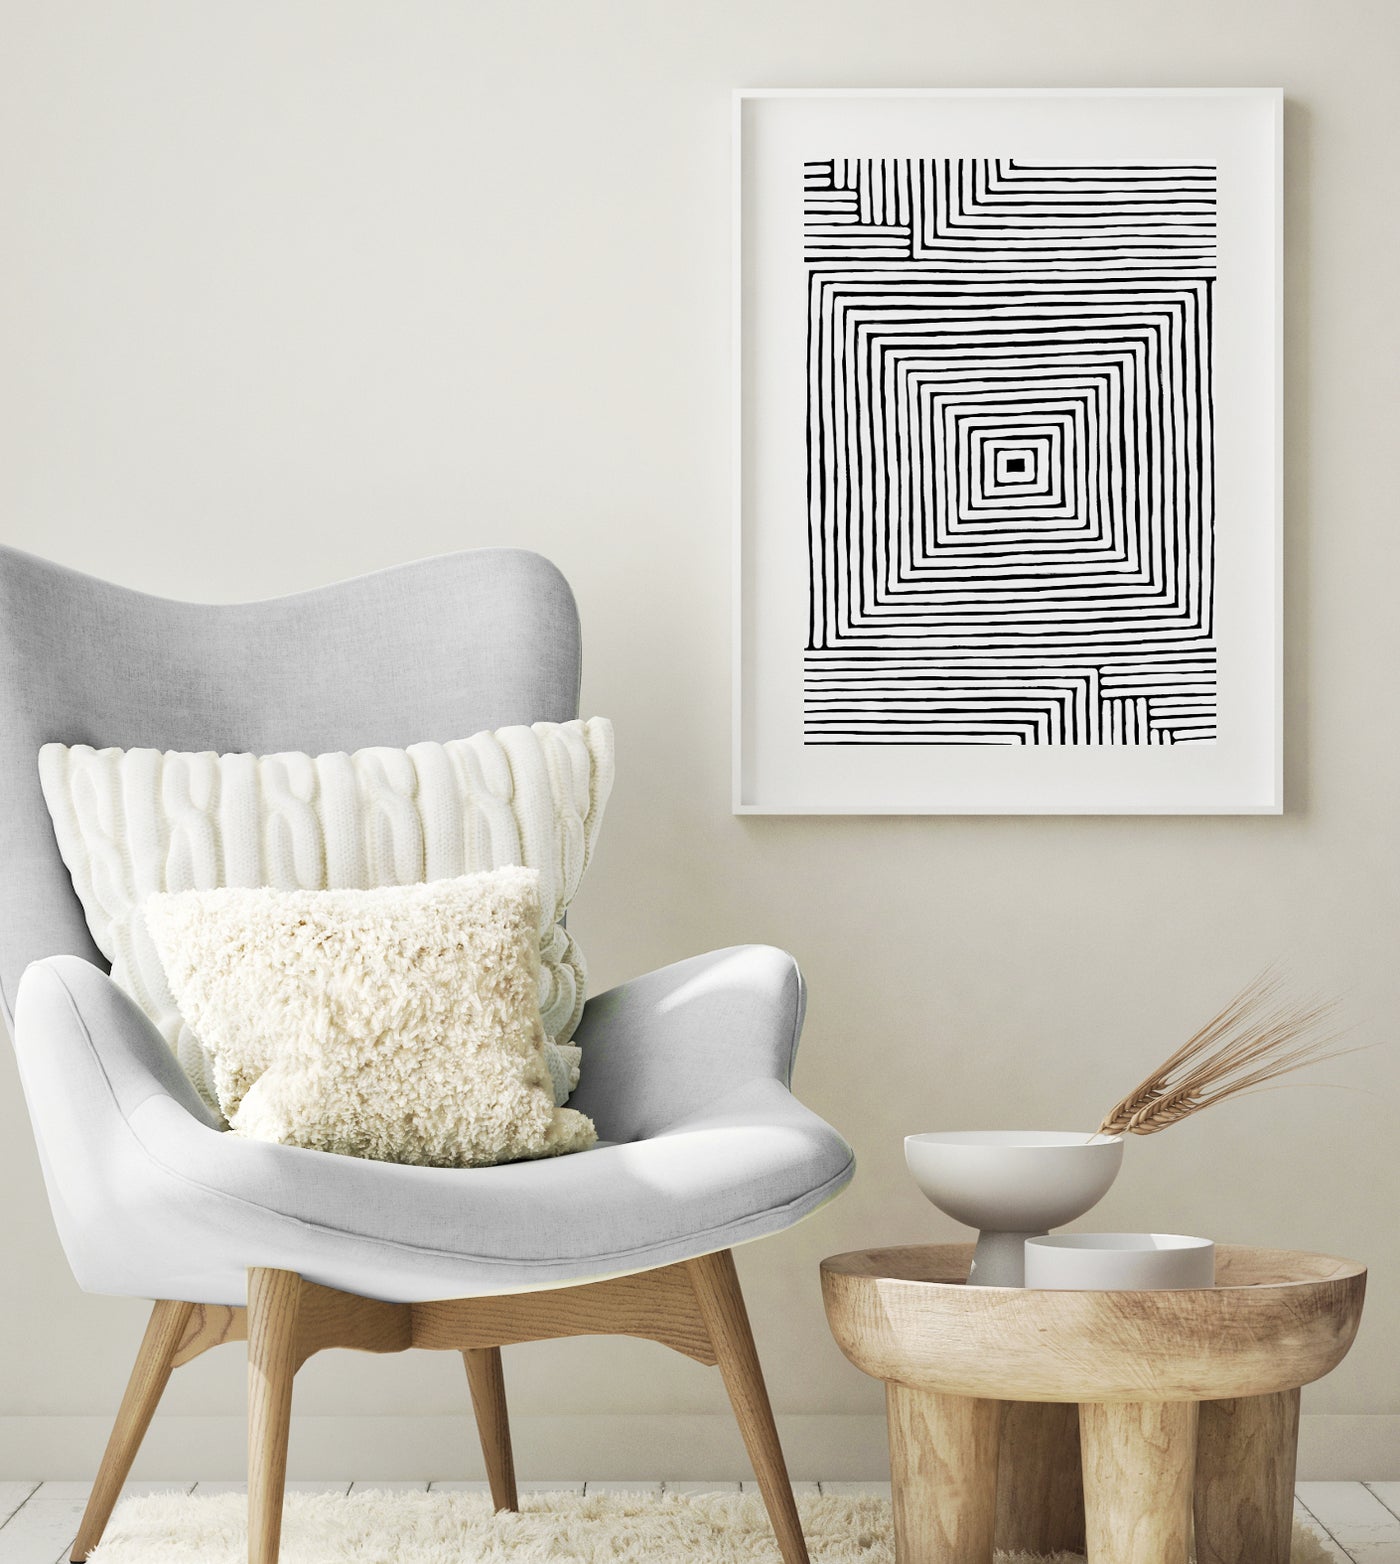 Black & White Abstract Wall Art, Contemporary Geometric Art Print, Ready-to-Hang Canvas, Extra Large Wall Decor | arrtopia